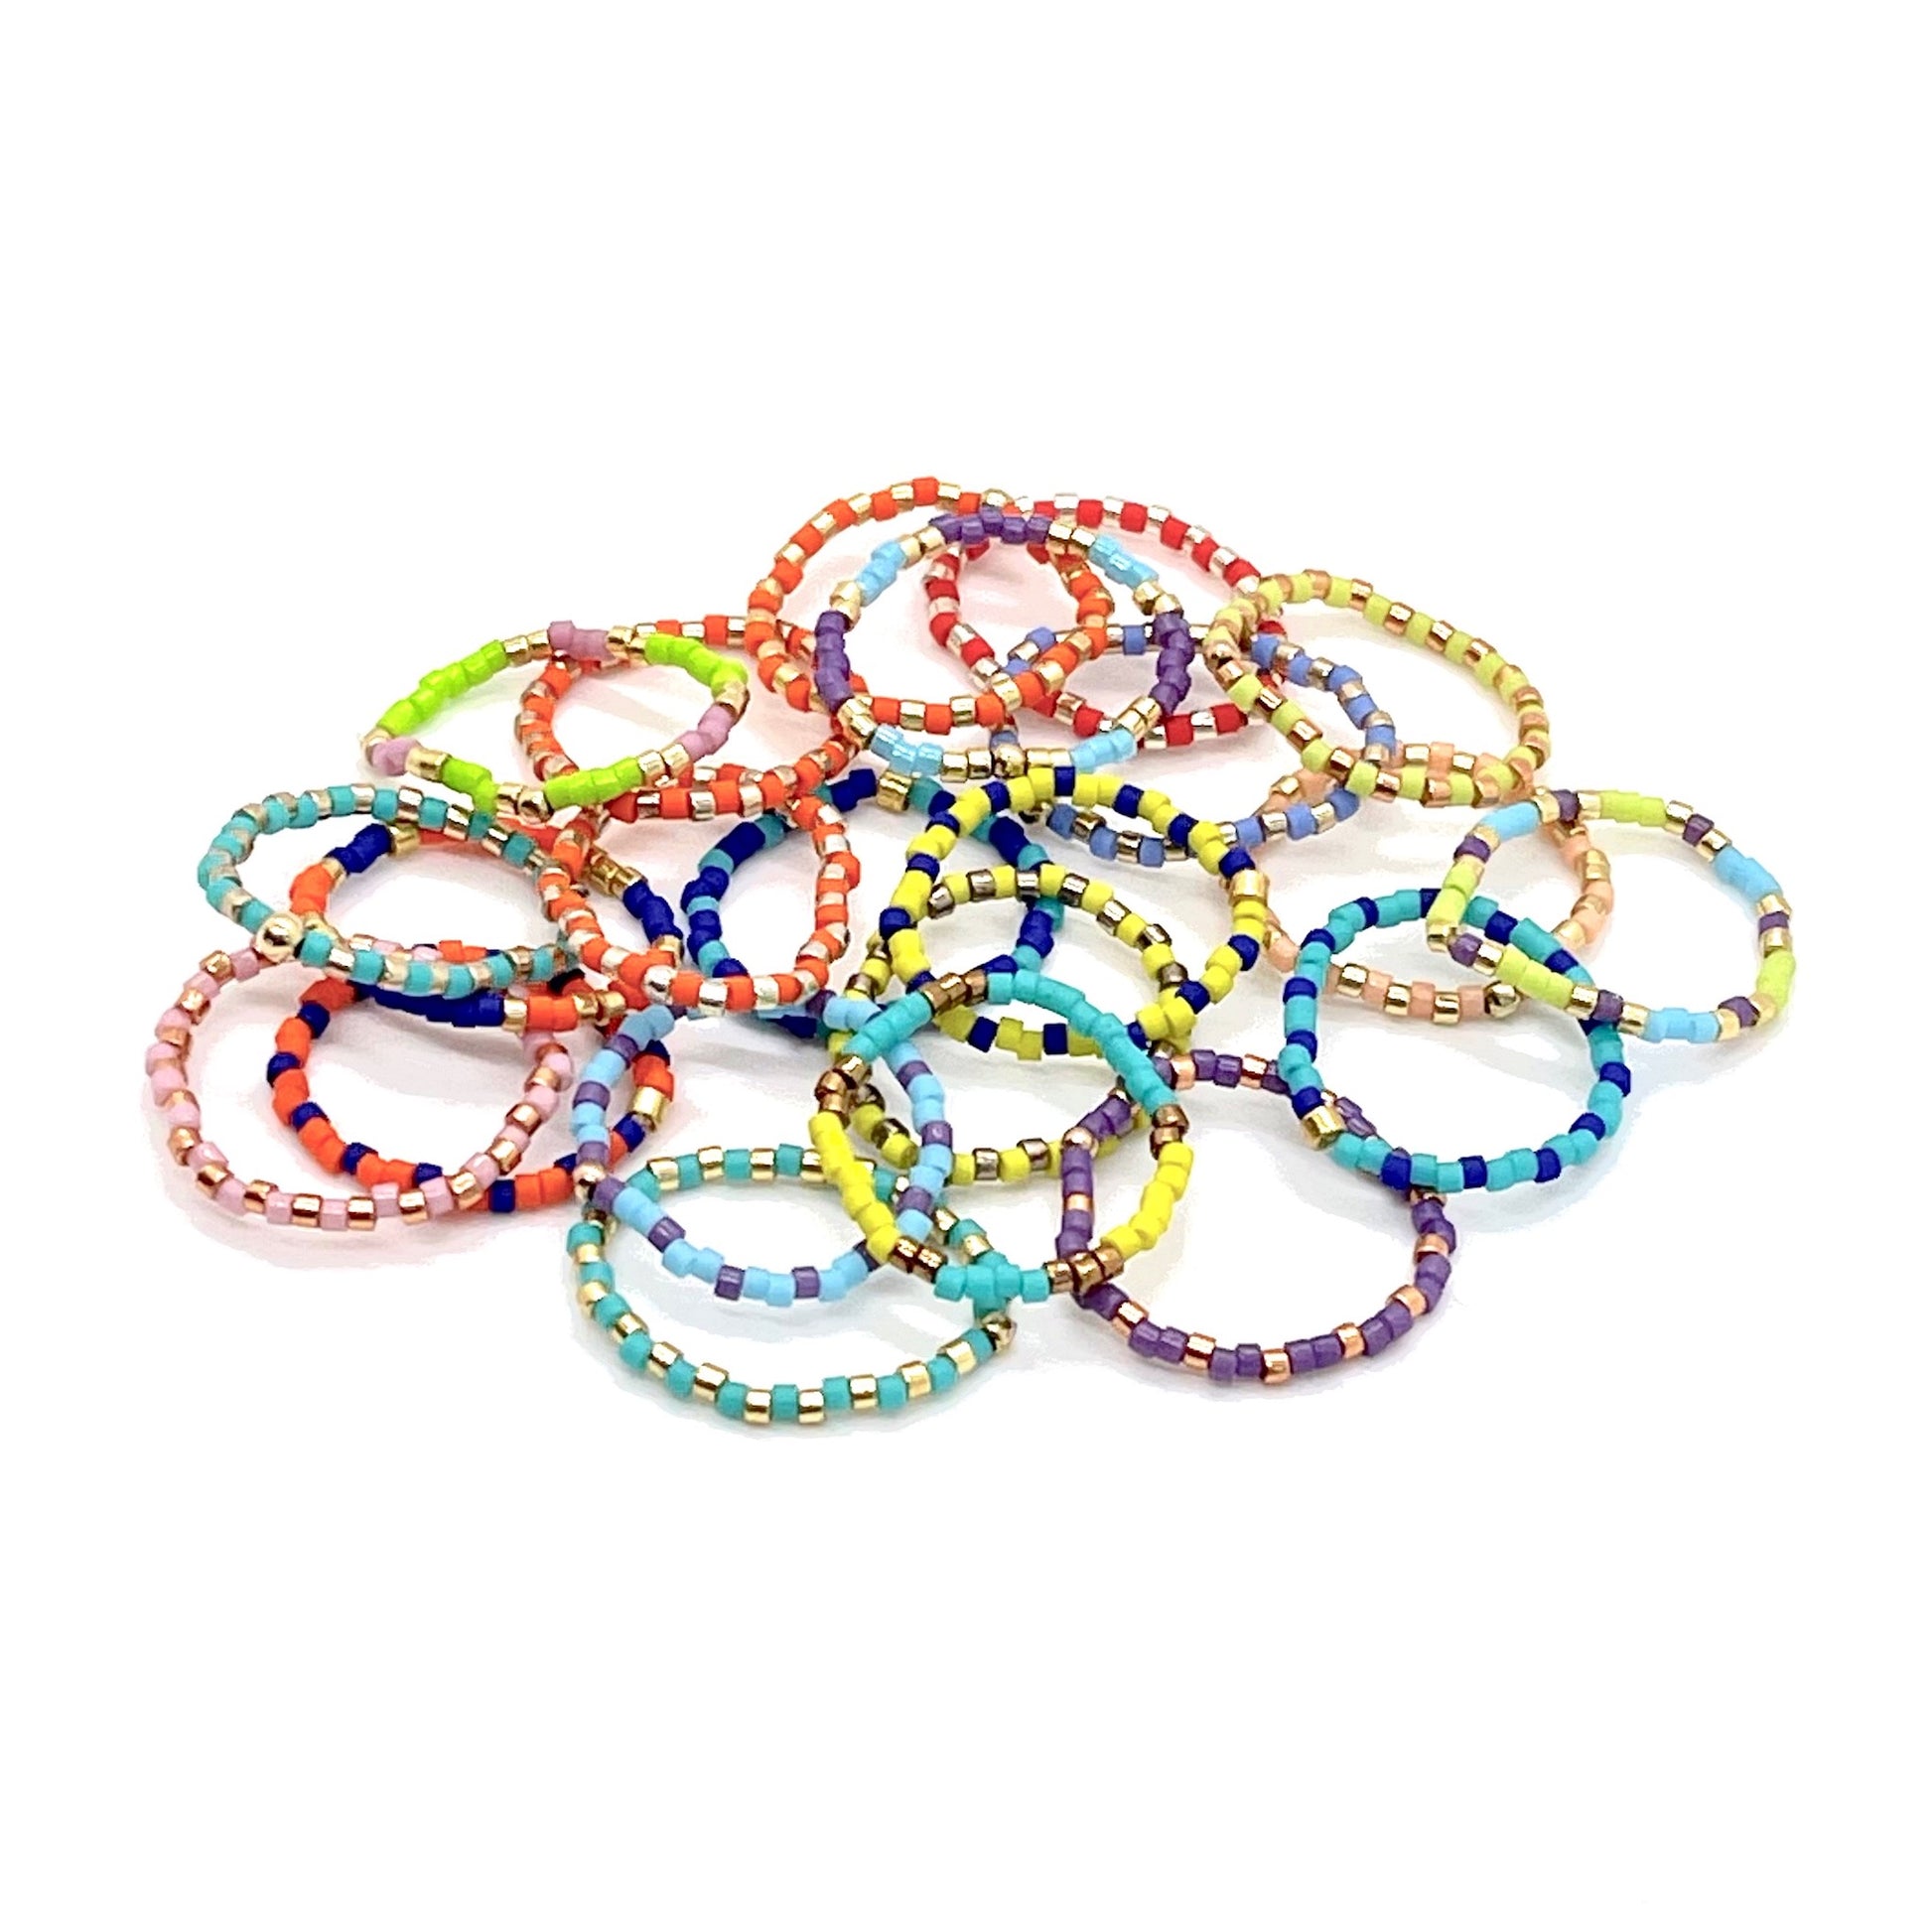 Beaded rings with colorful combinations of Miyuki Delica seed beads on stretch cord. Great for stacking.